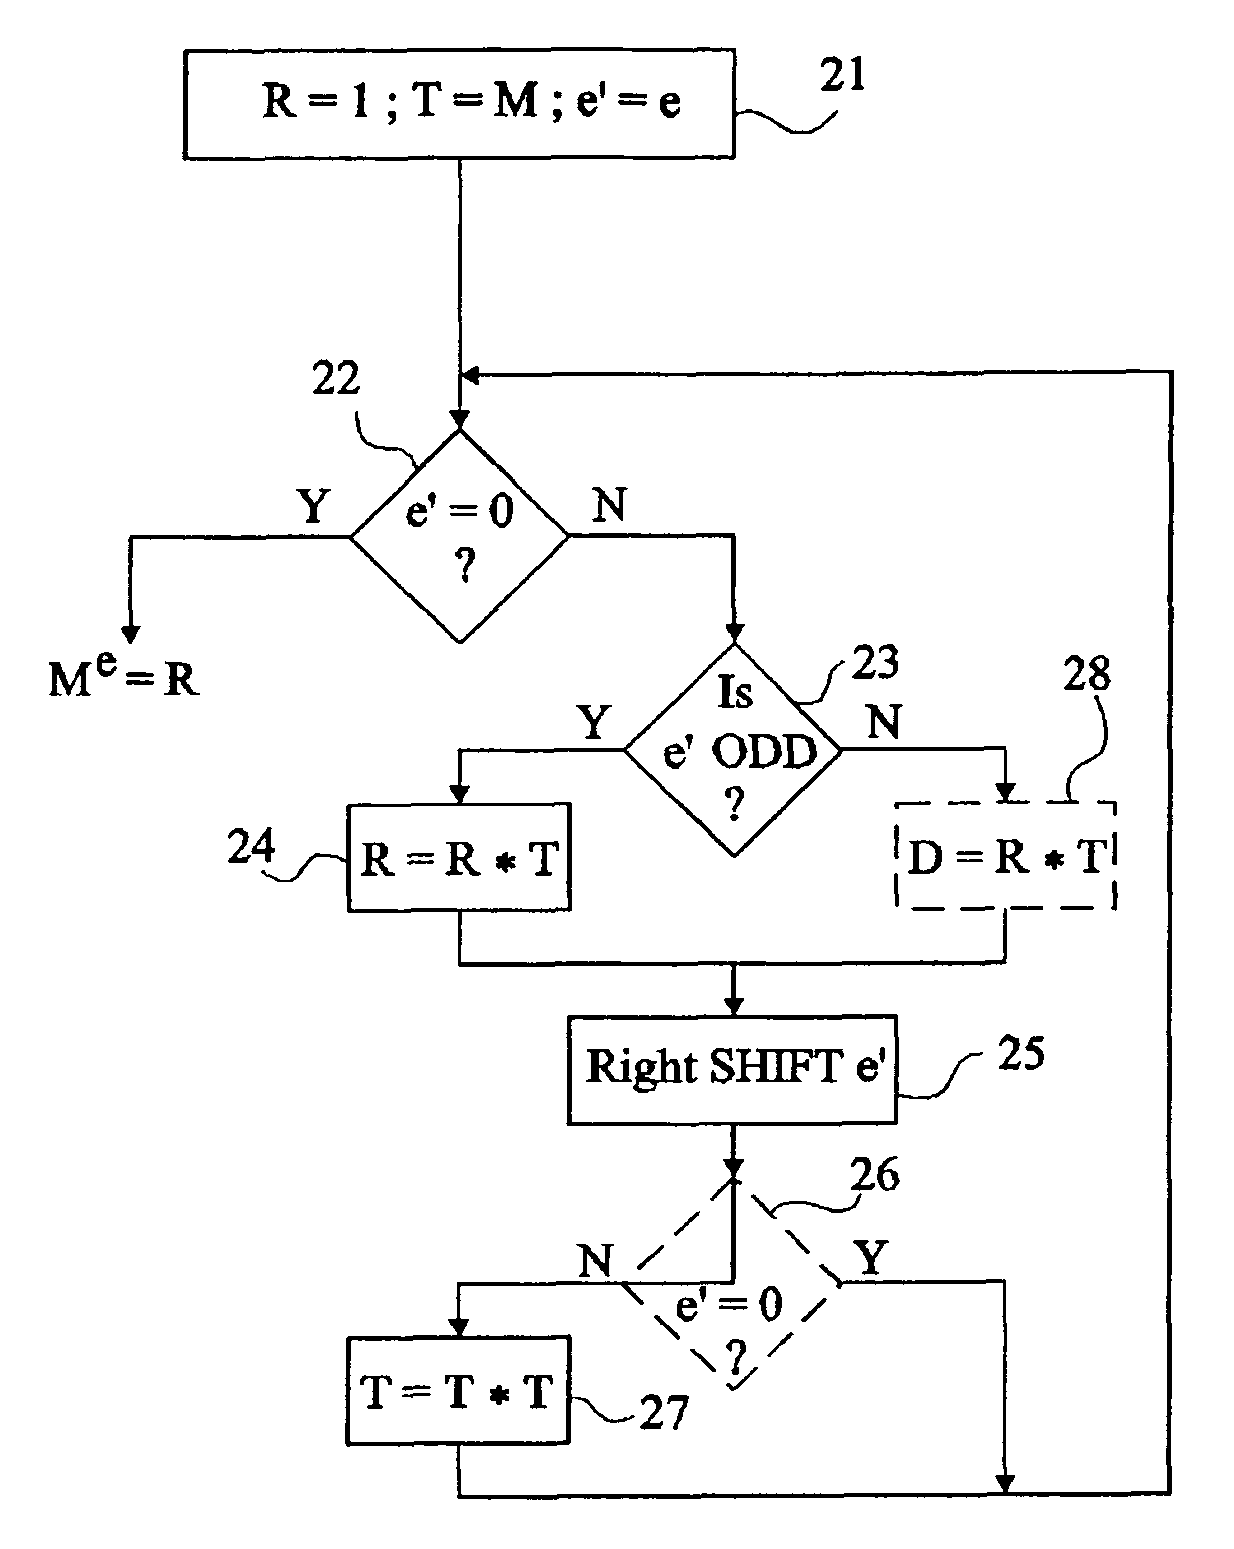 Detection of a disturbance in a calculation performed by an integrated circuit